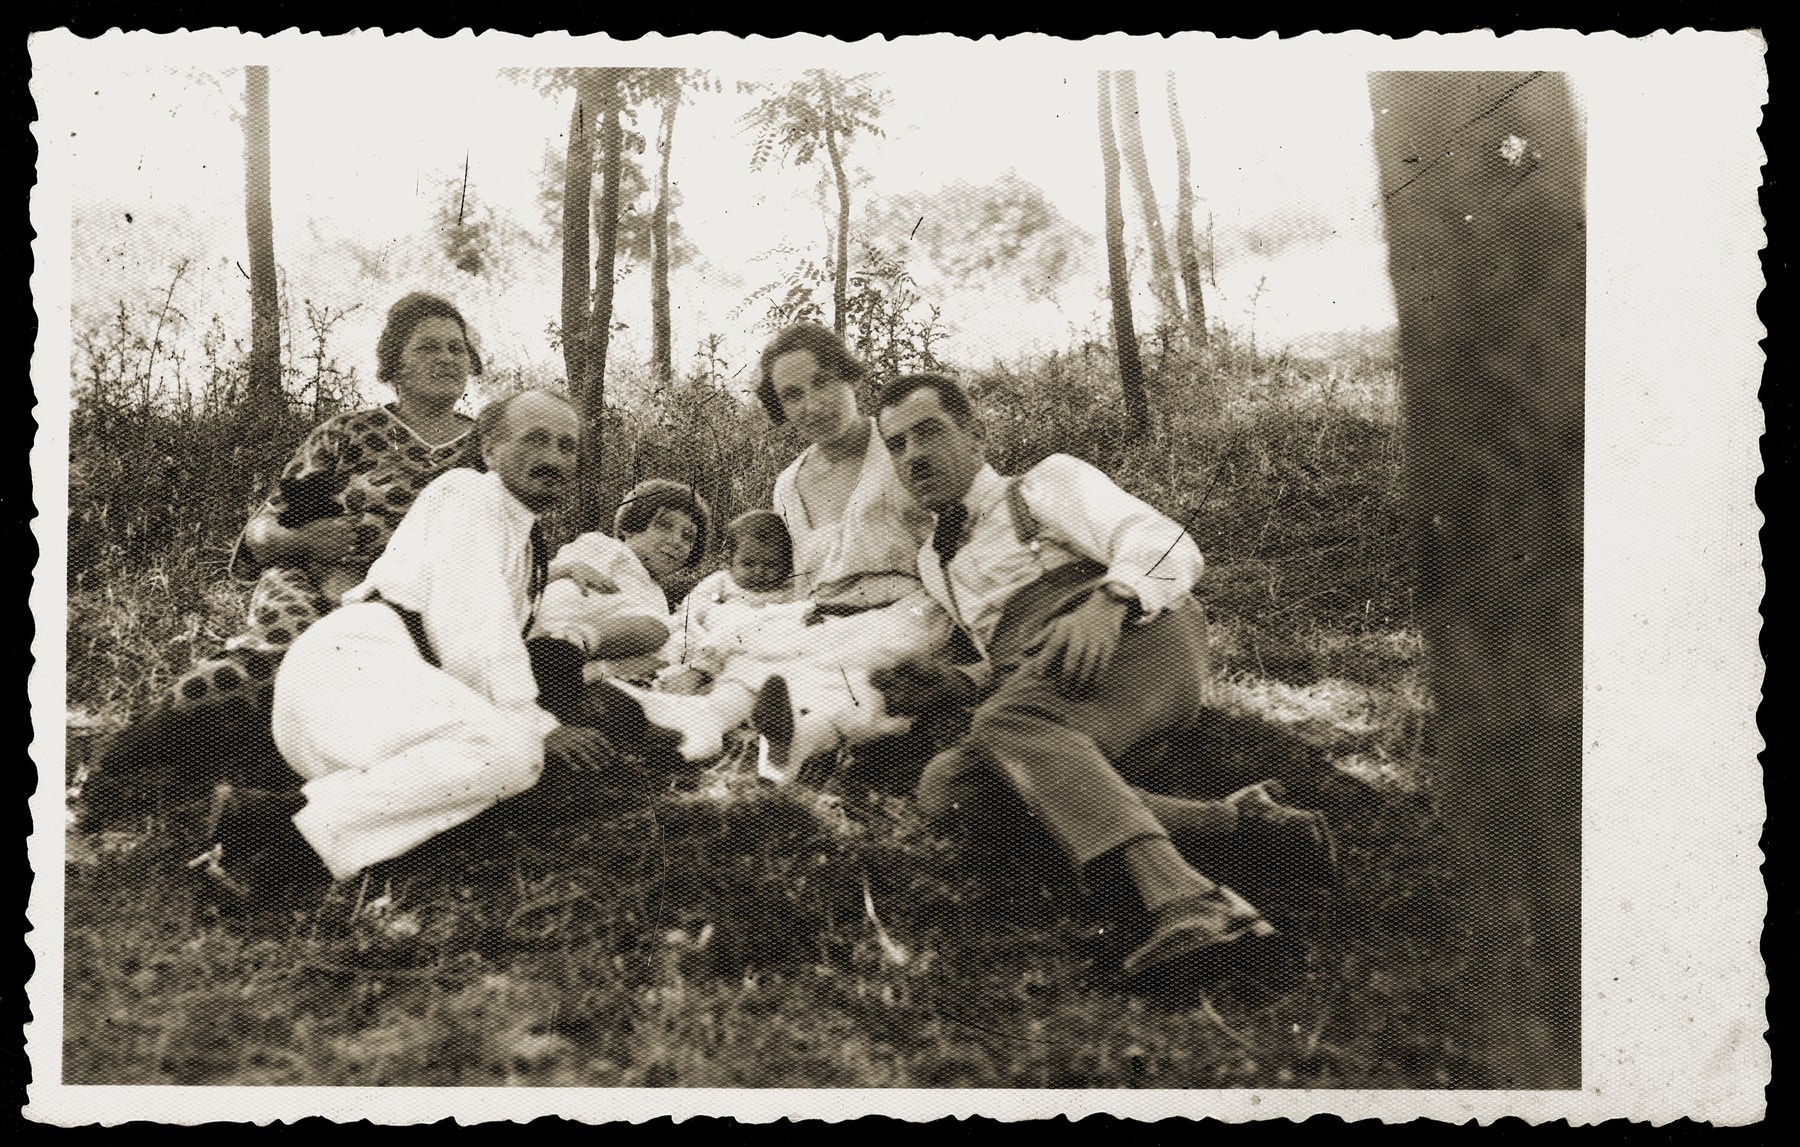 The family of Gavra Konfino on an outing in Belgrade.

From right to left are Gavra, Elizabeth, Gizella and Gabriela (Ella) Konfino and an unidentified couple.